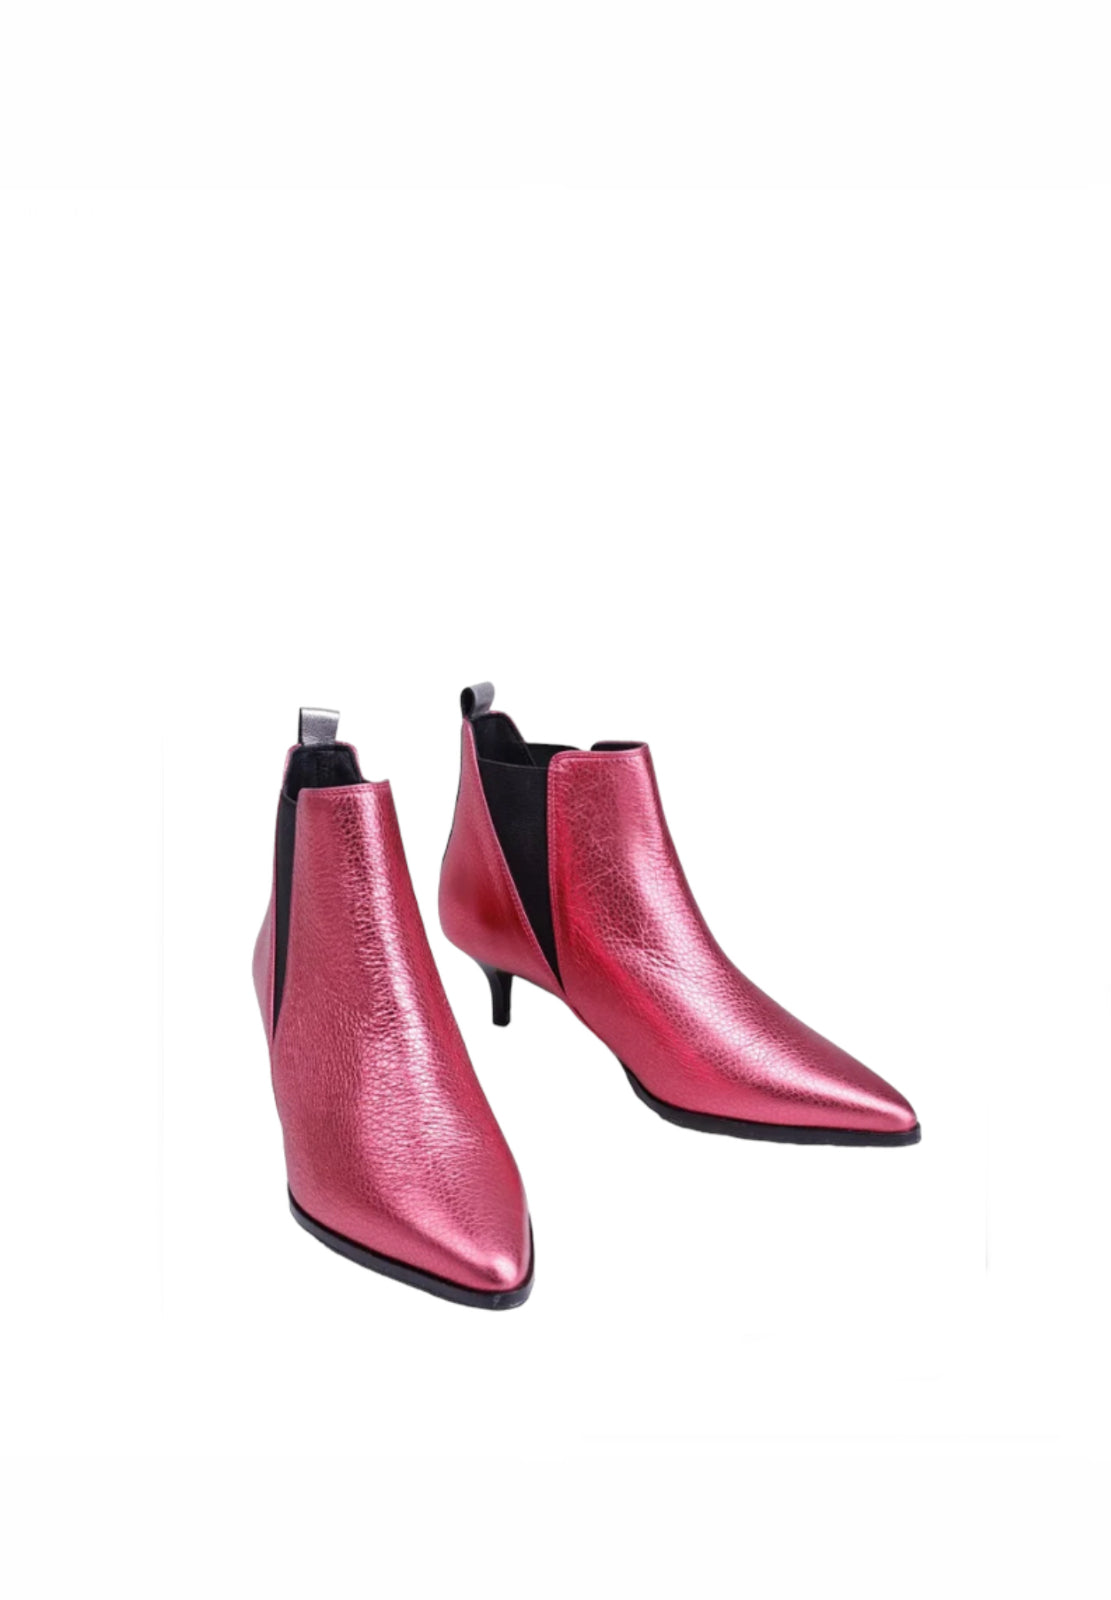 Load image into Gallery viewer, Hush Penrose Pink Metallic Boots - new
